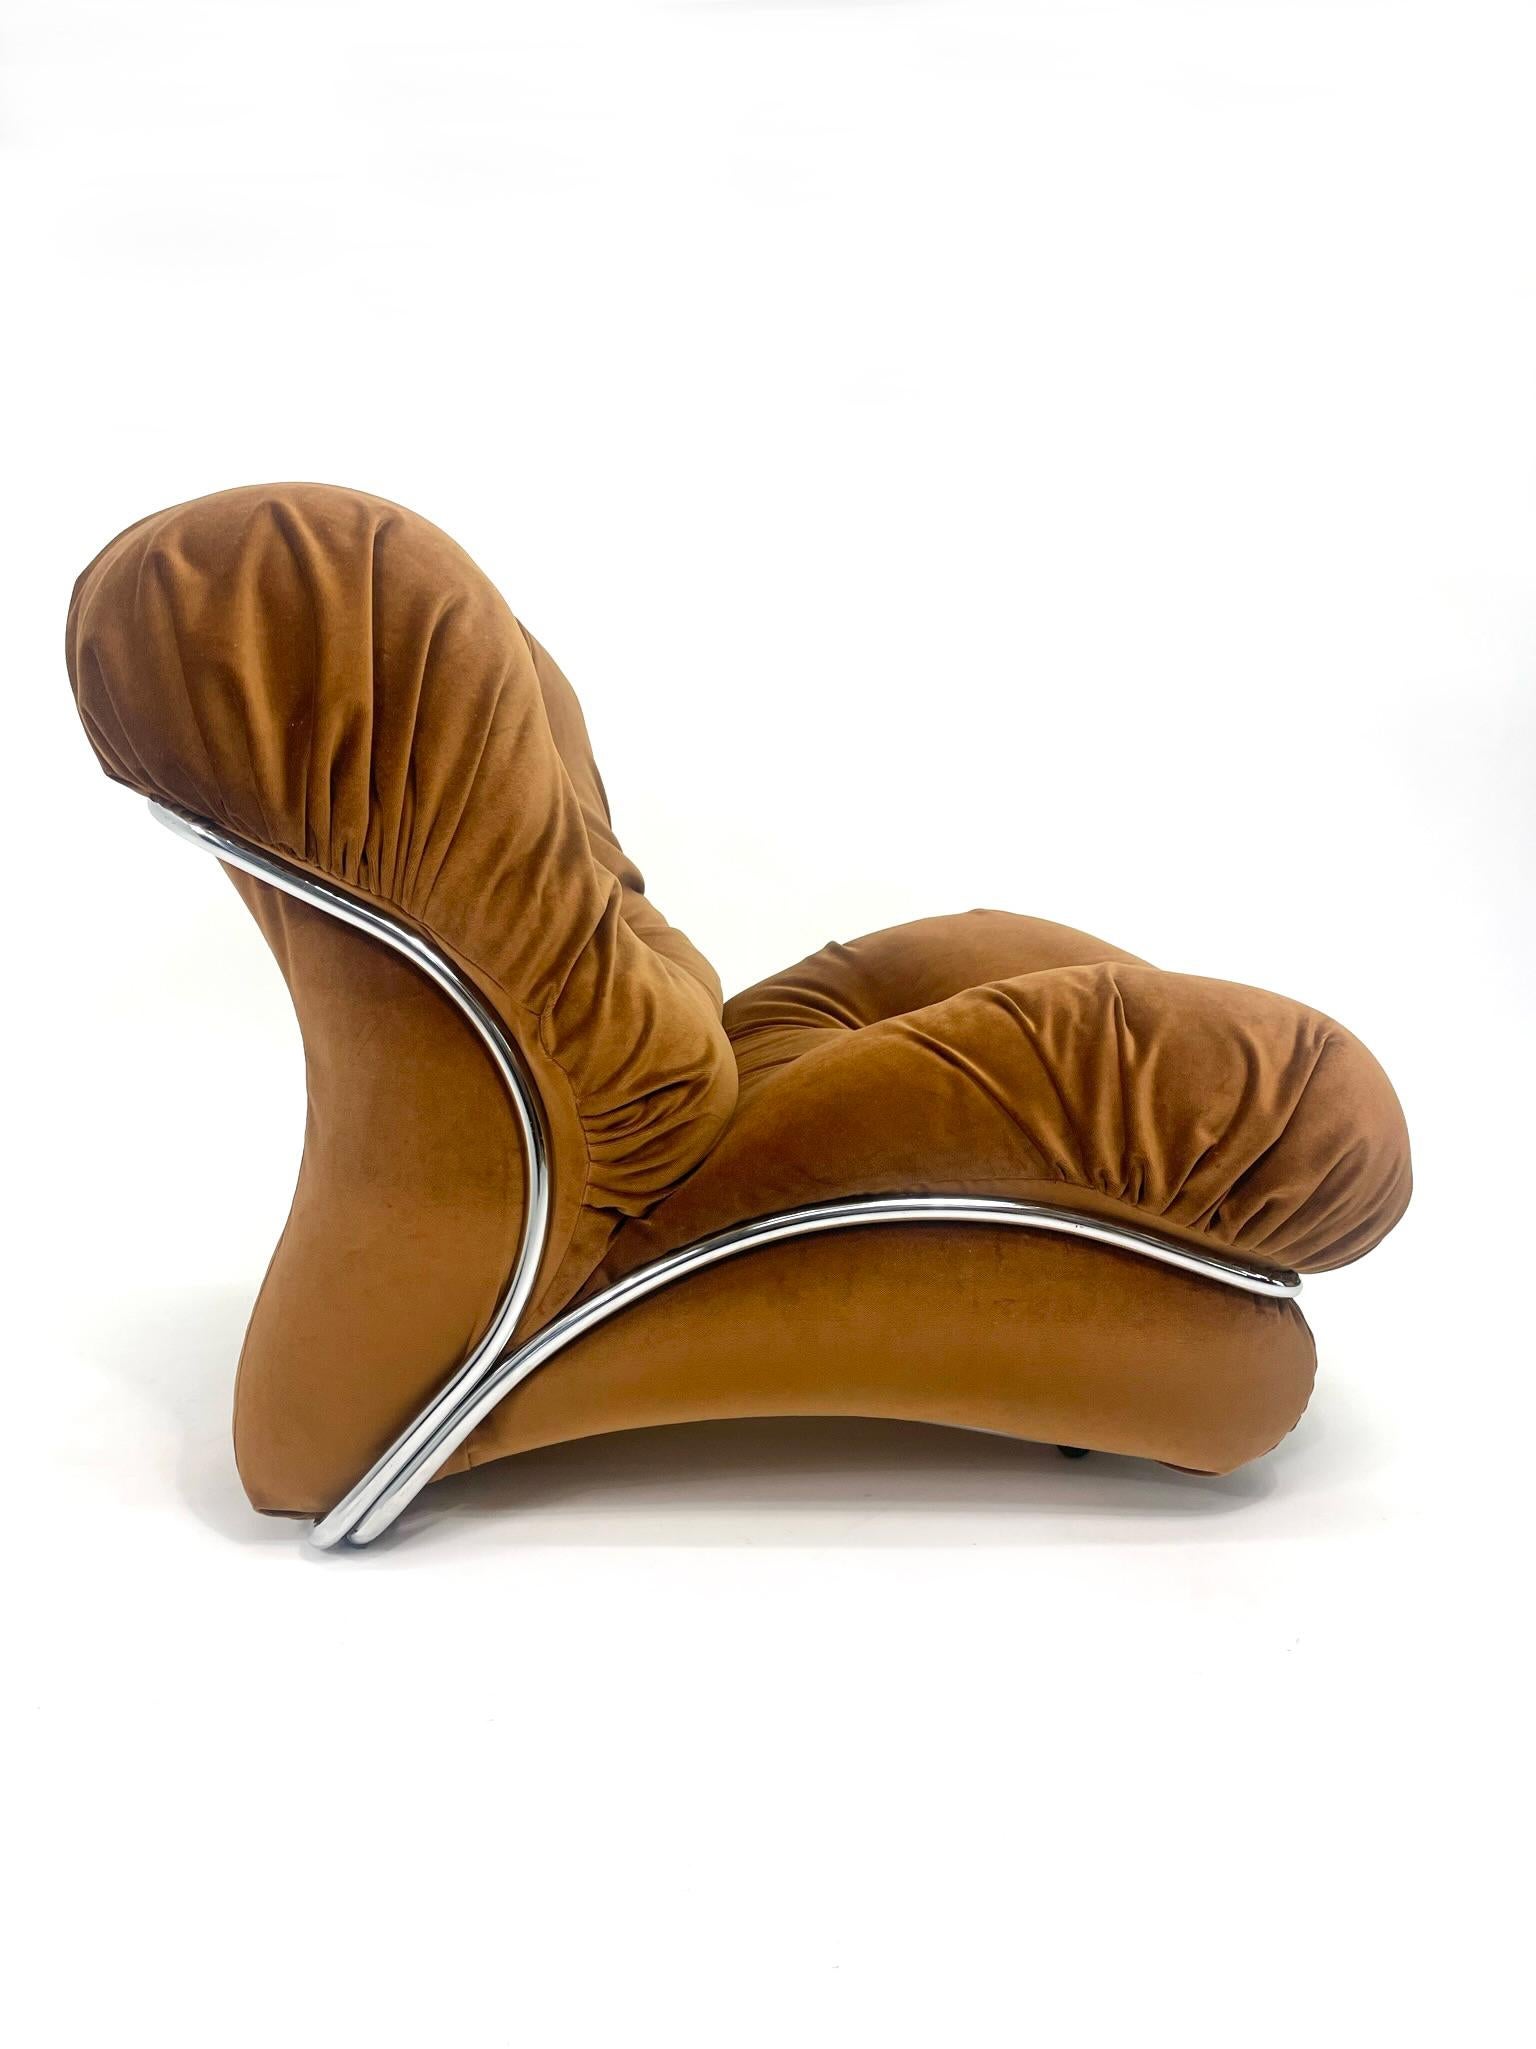 I.P.E. 'Corolla' Lounge Chair (2 available) In Excellent Condition For Sale In San Diego, CA